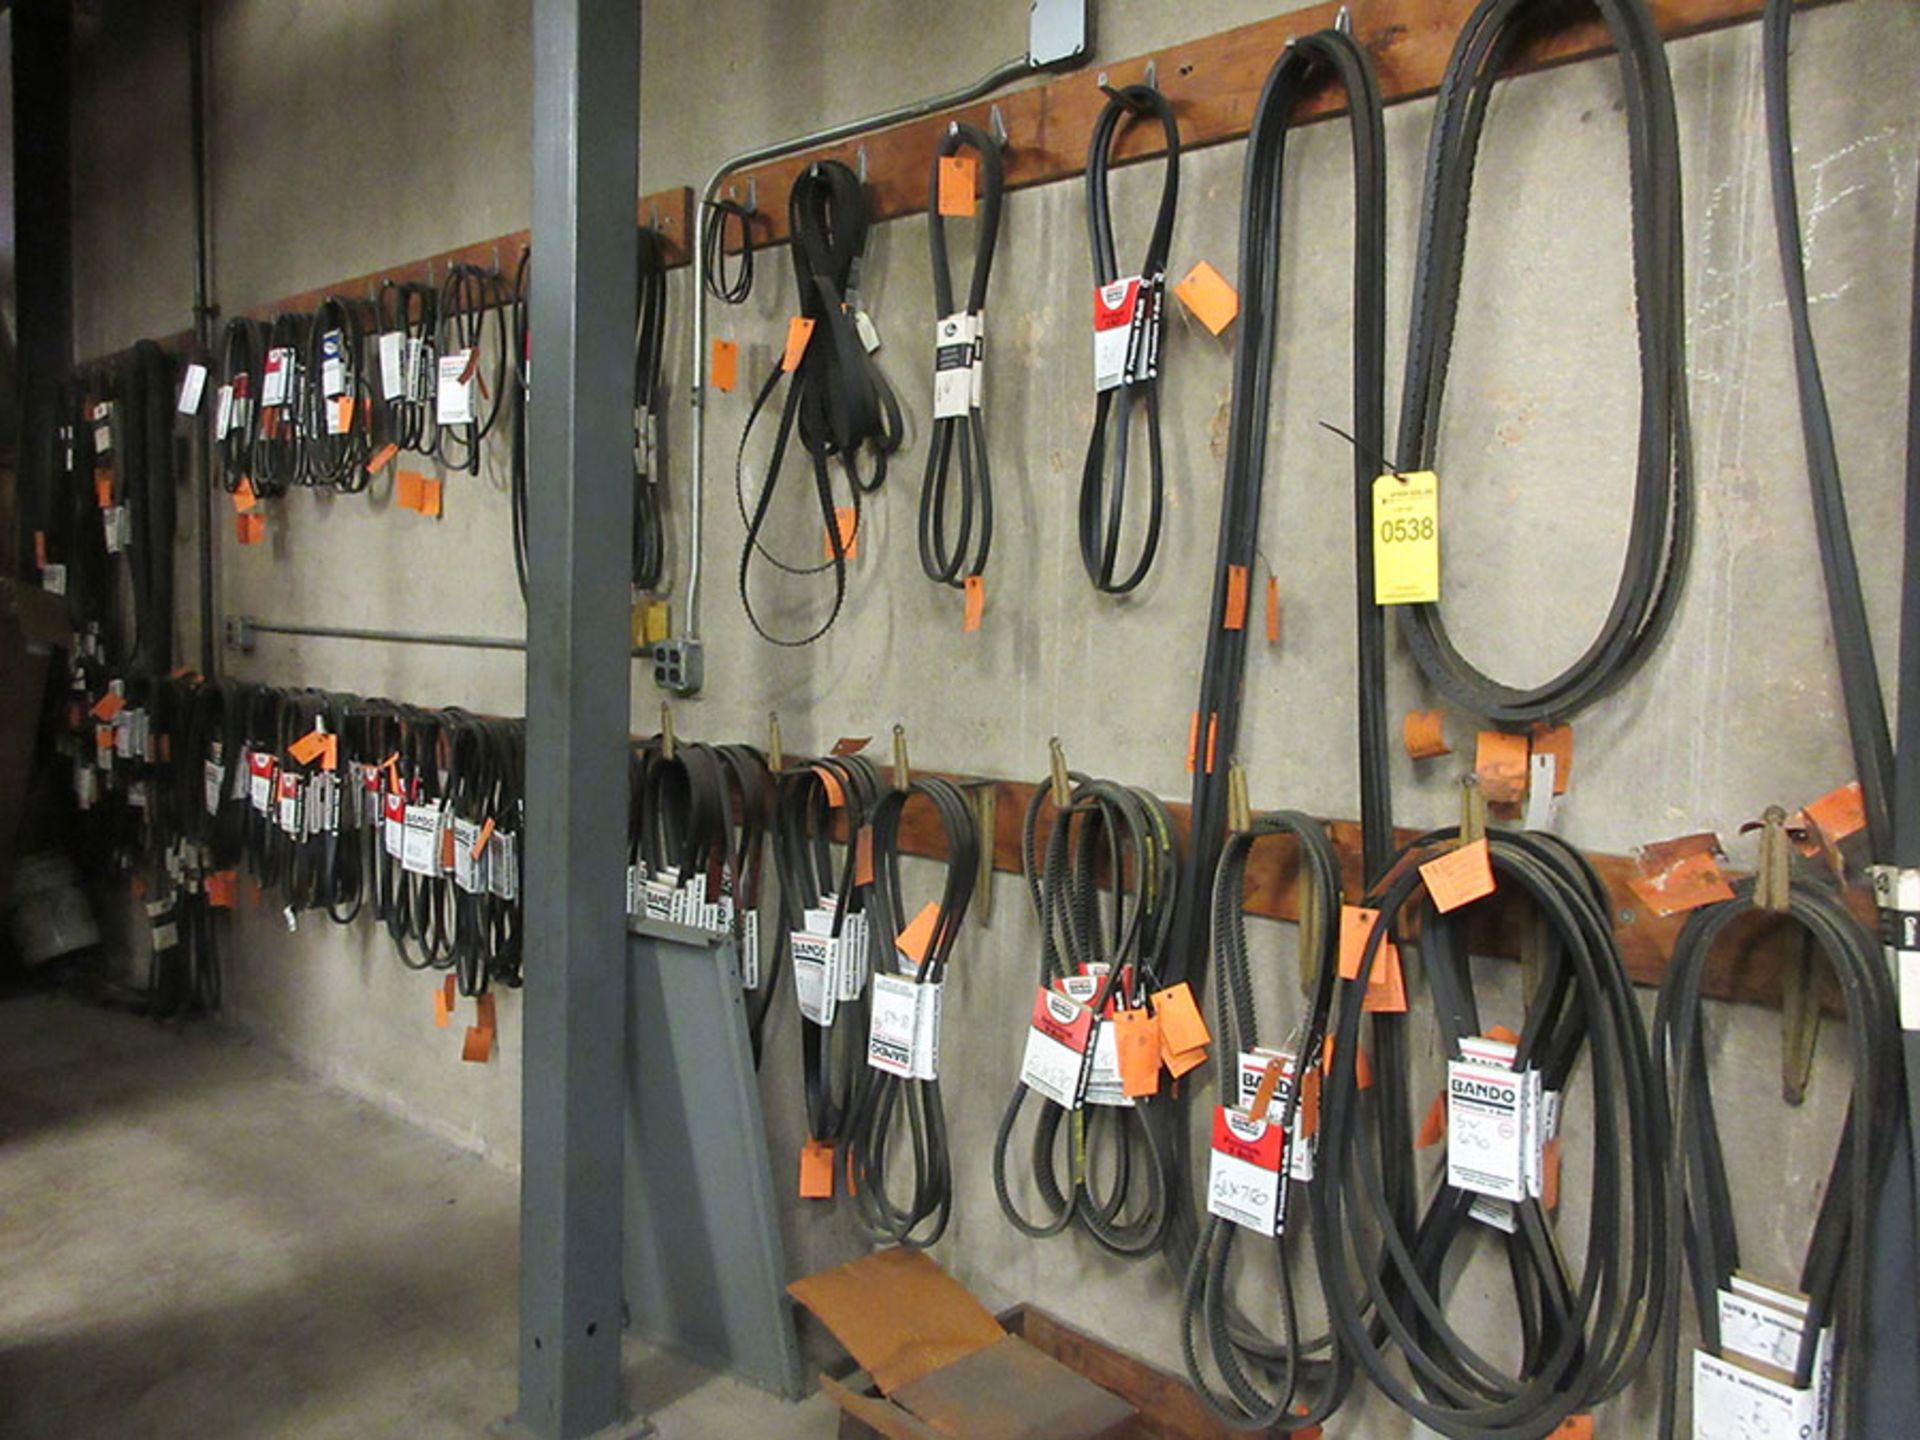 ASSORTED V-BELTS ON WALL